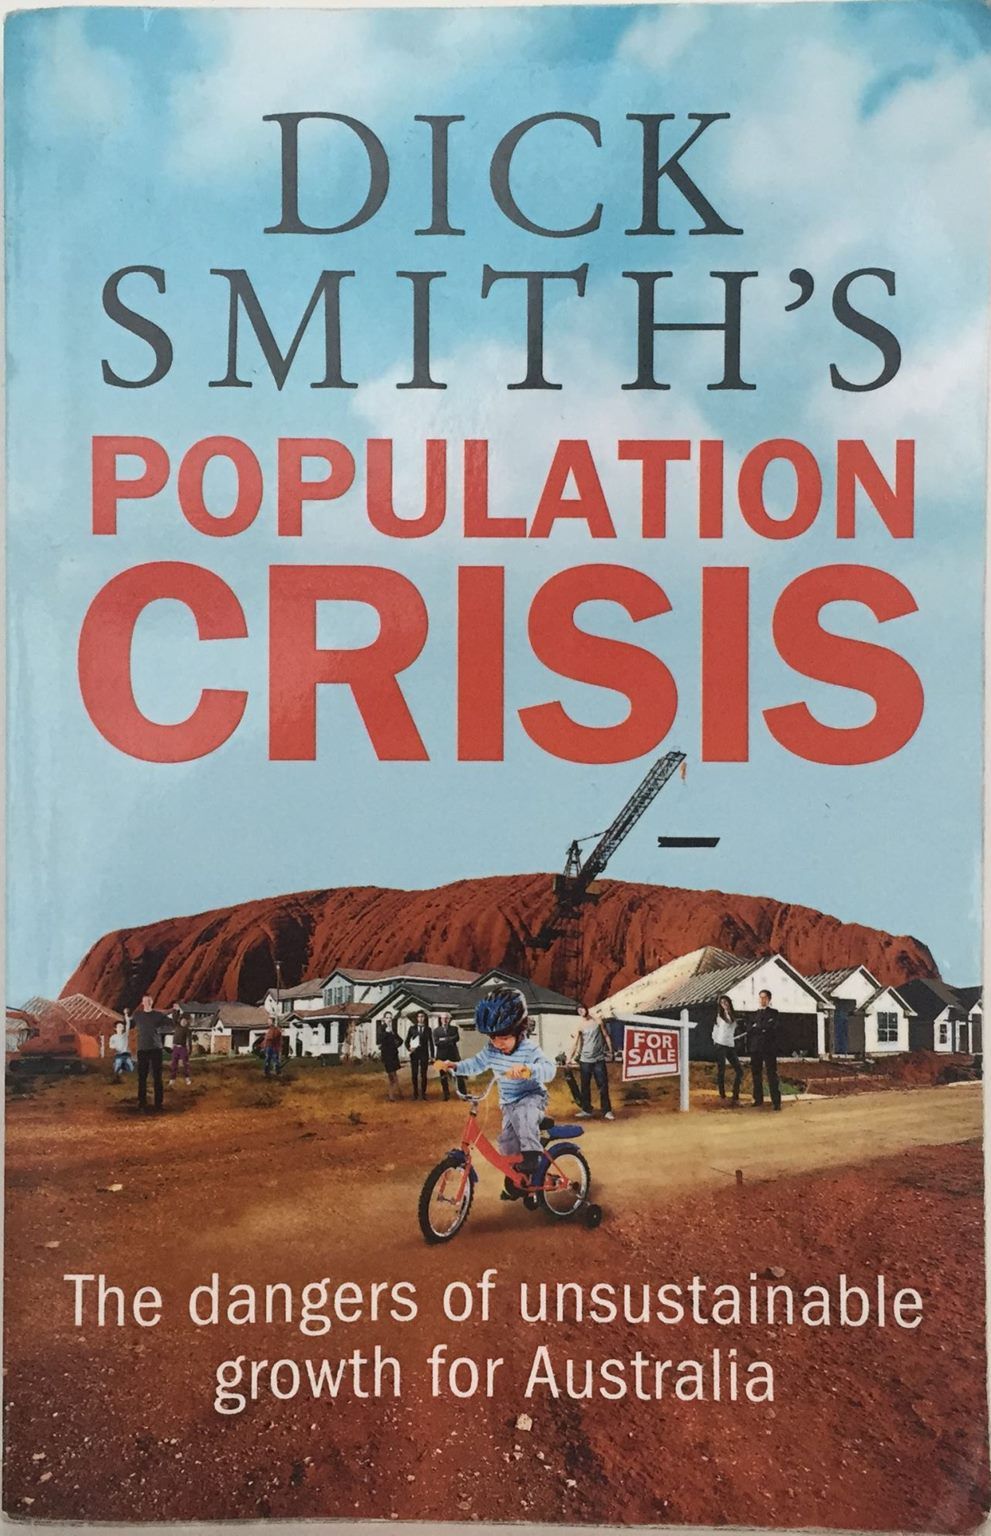 DICK SMITH'S POPULATION CRISIS: The dangers of unsustainable growth in Australia